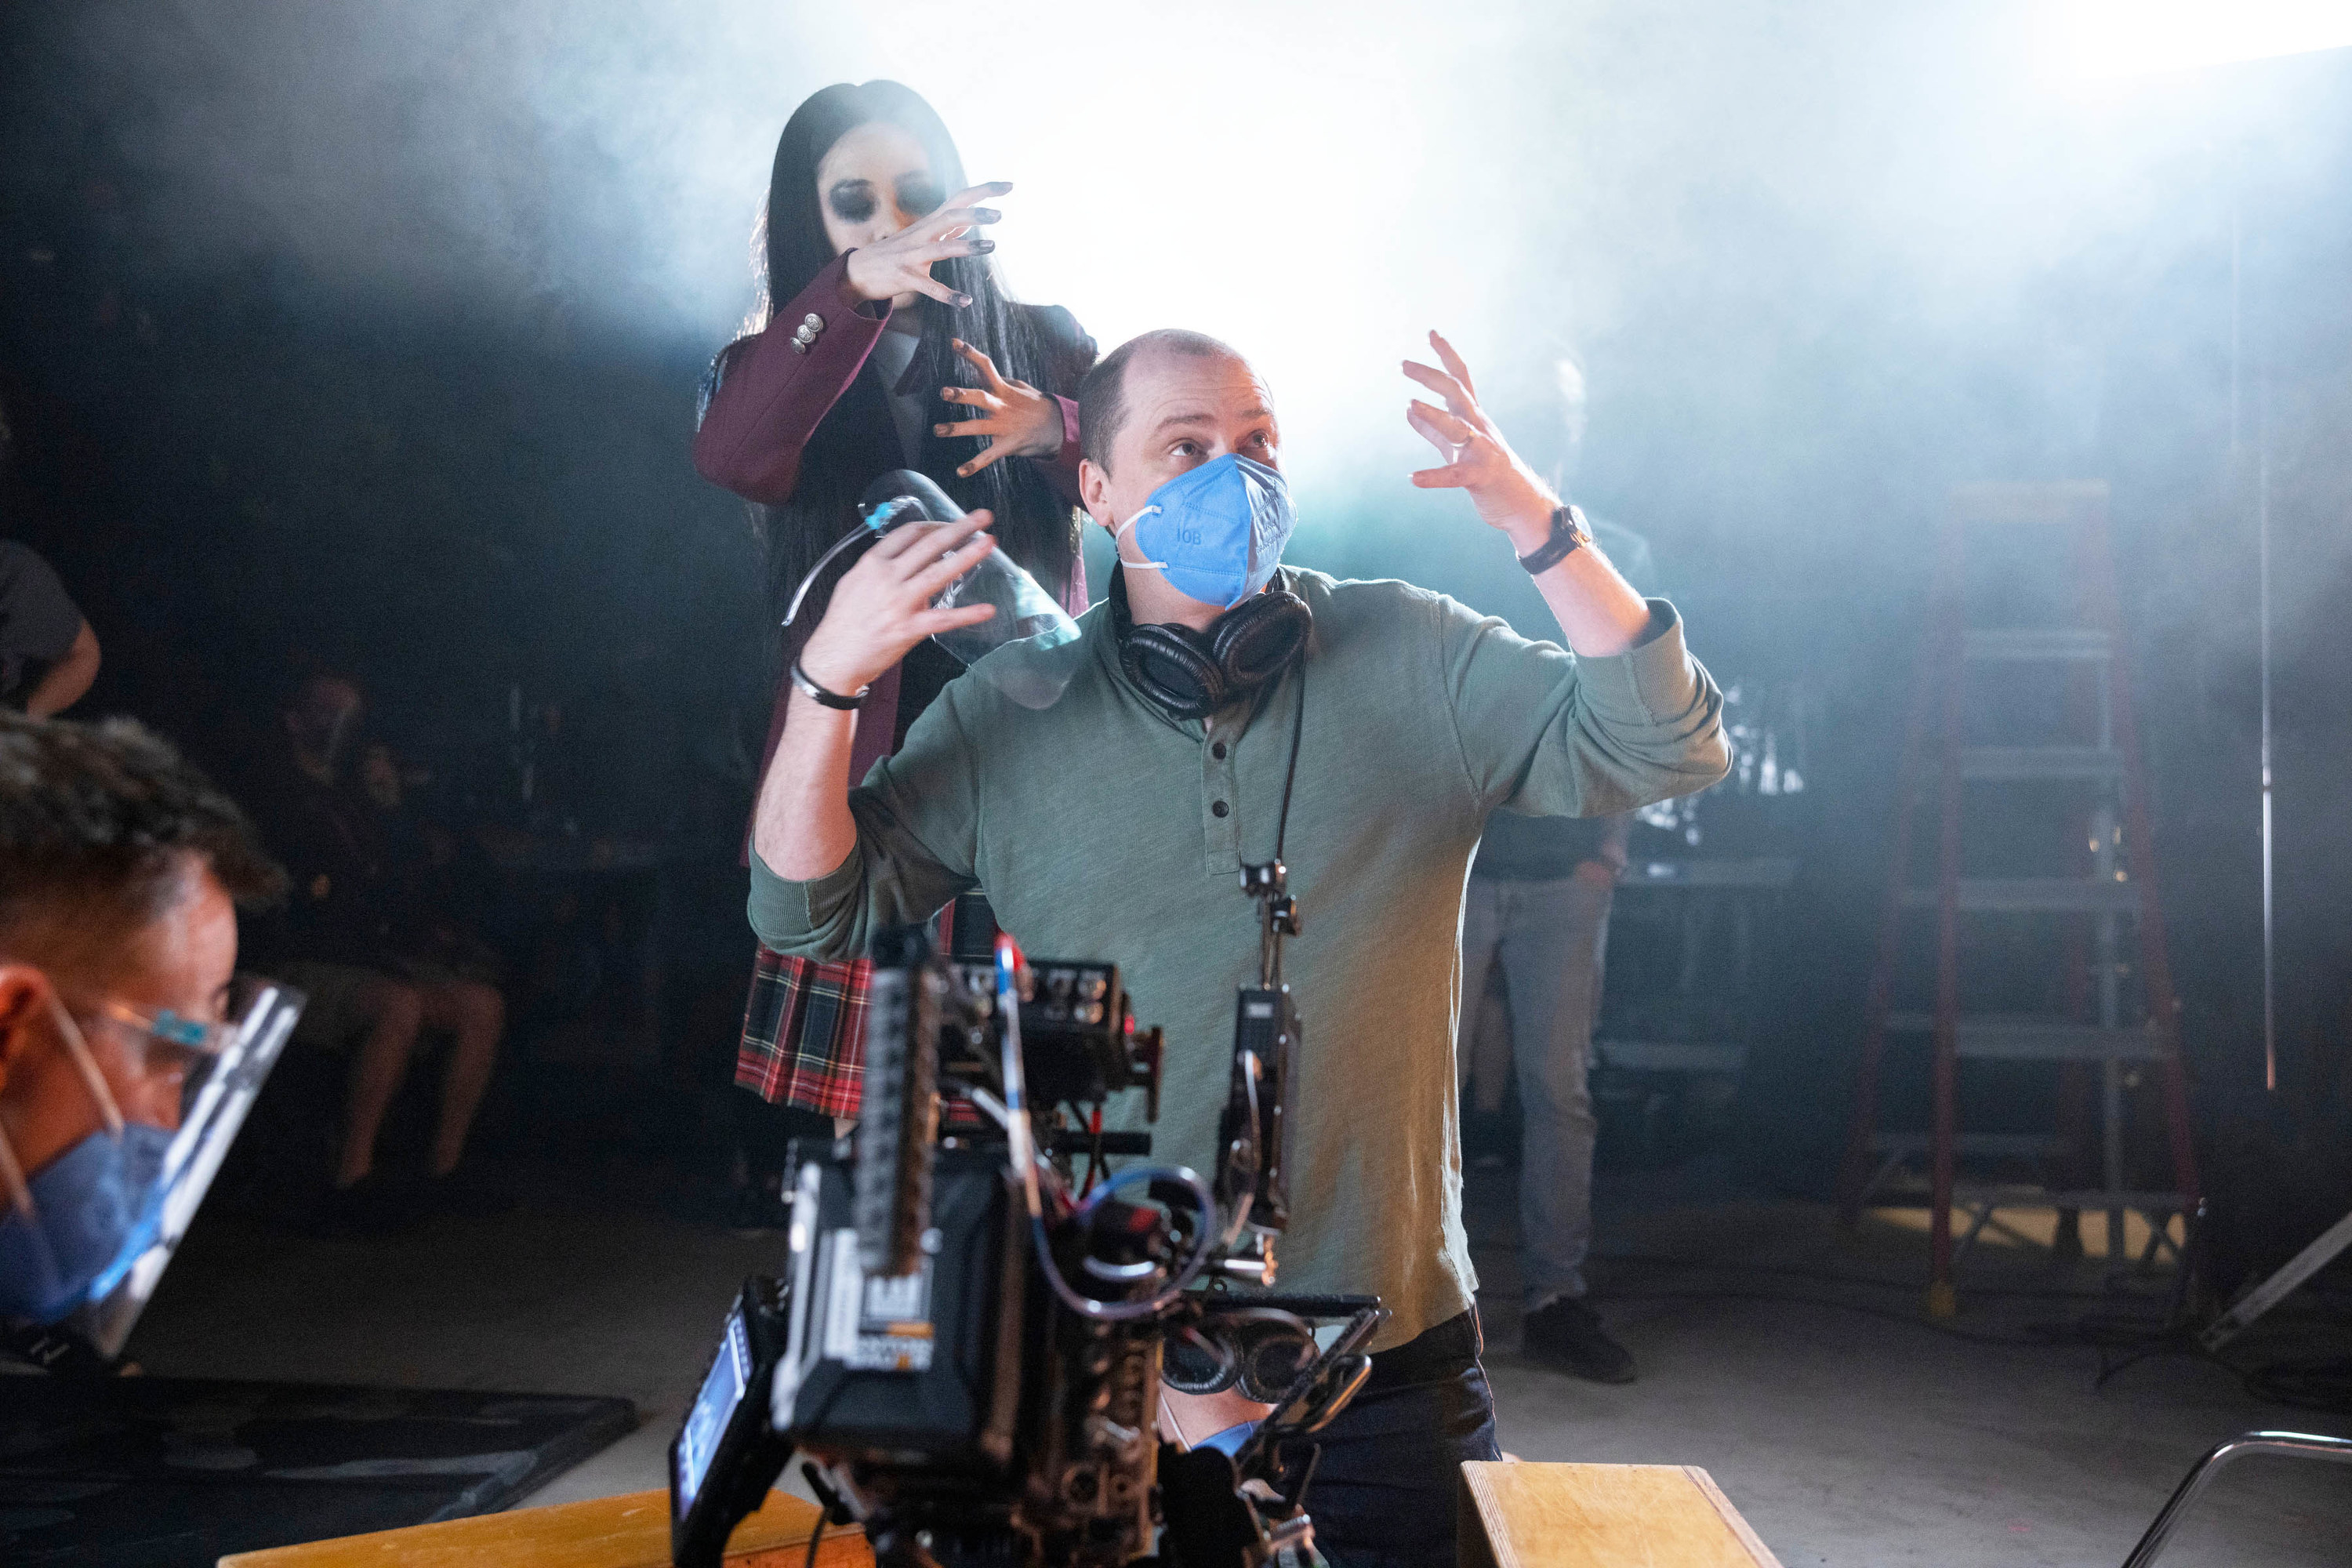 Mike directing a scene while wearing a face mask